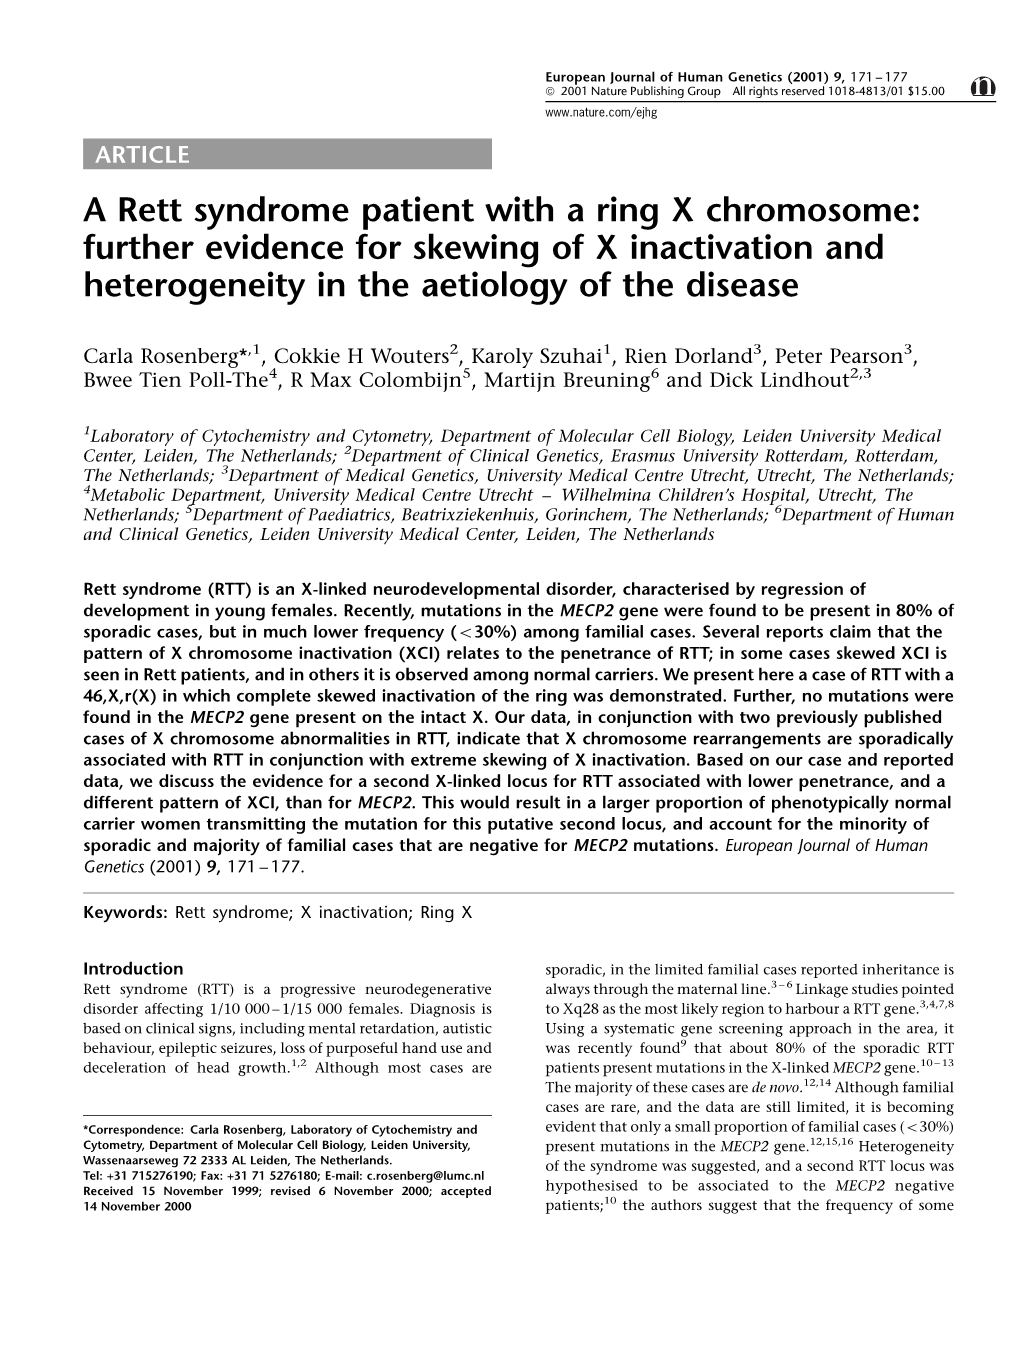 A Rett Syndrome Patient with a Ring X Chromosome: Further Evidence for Skewing of X Inactivation and Heterogeneity in the Aetiology of the Disease